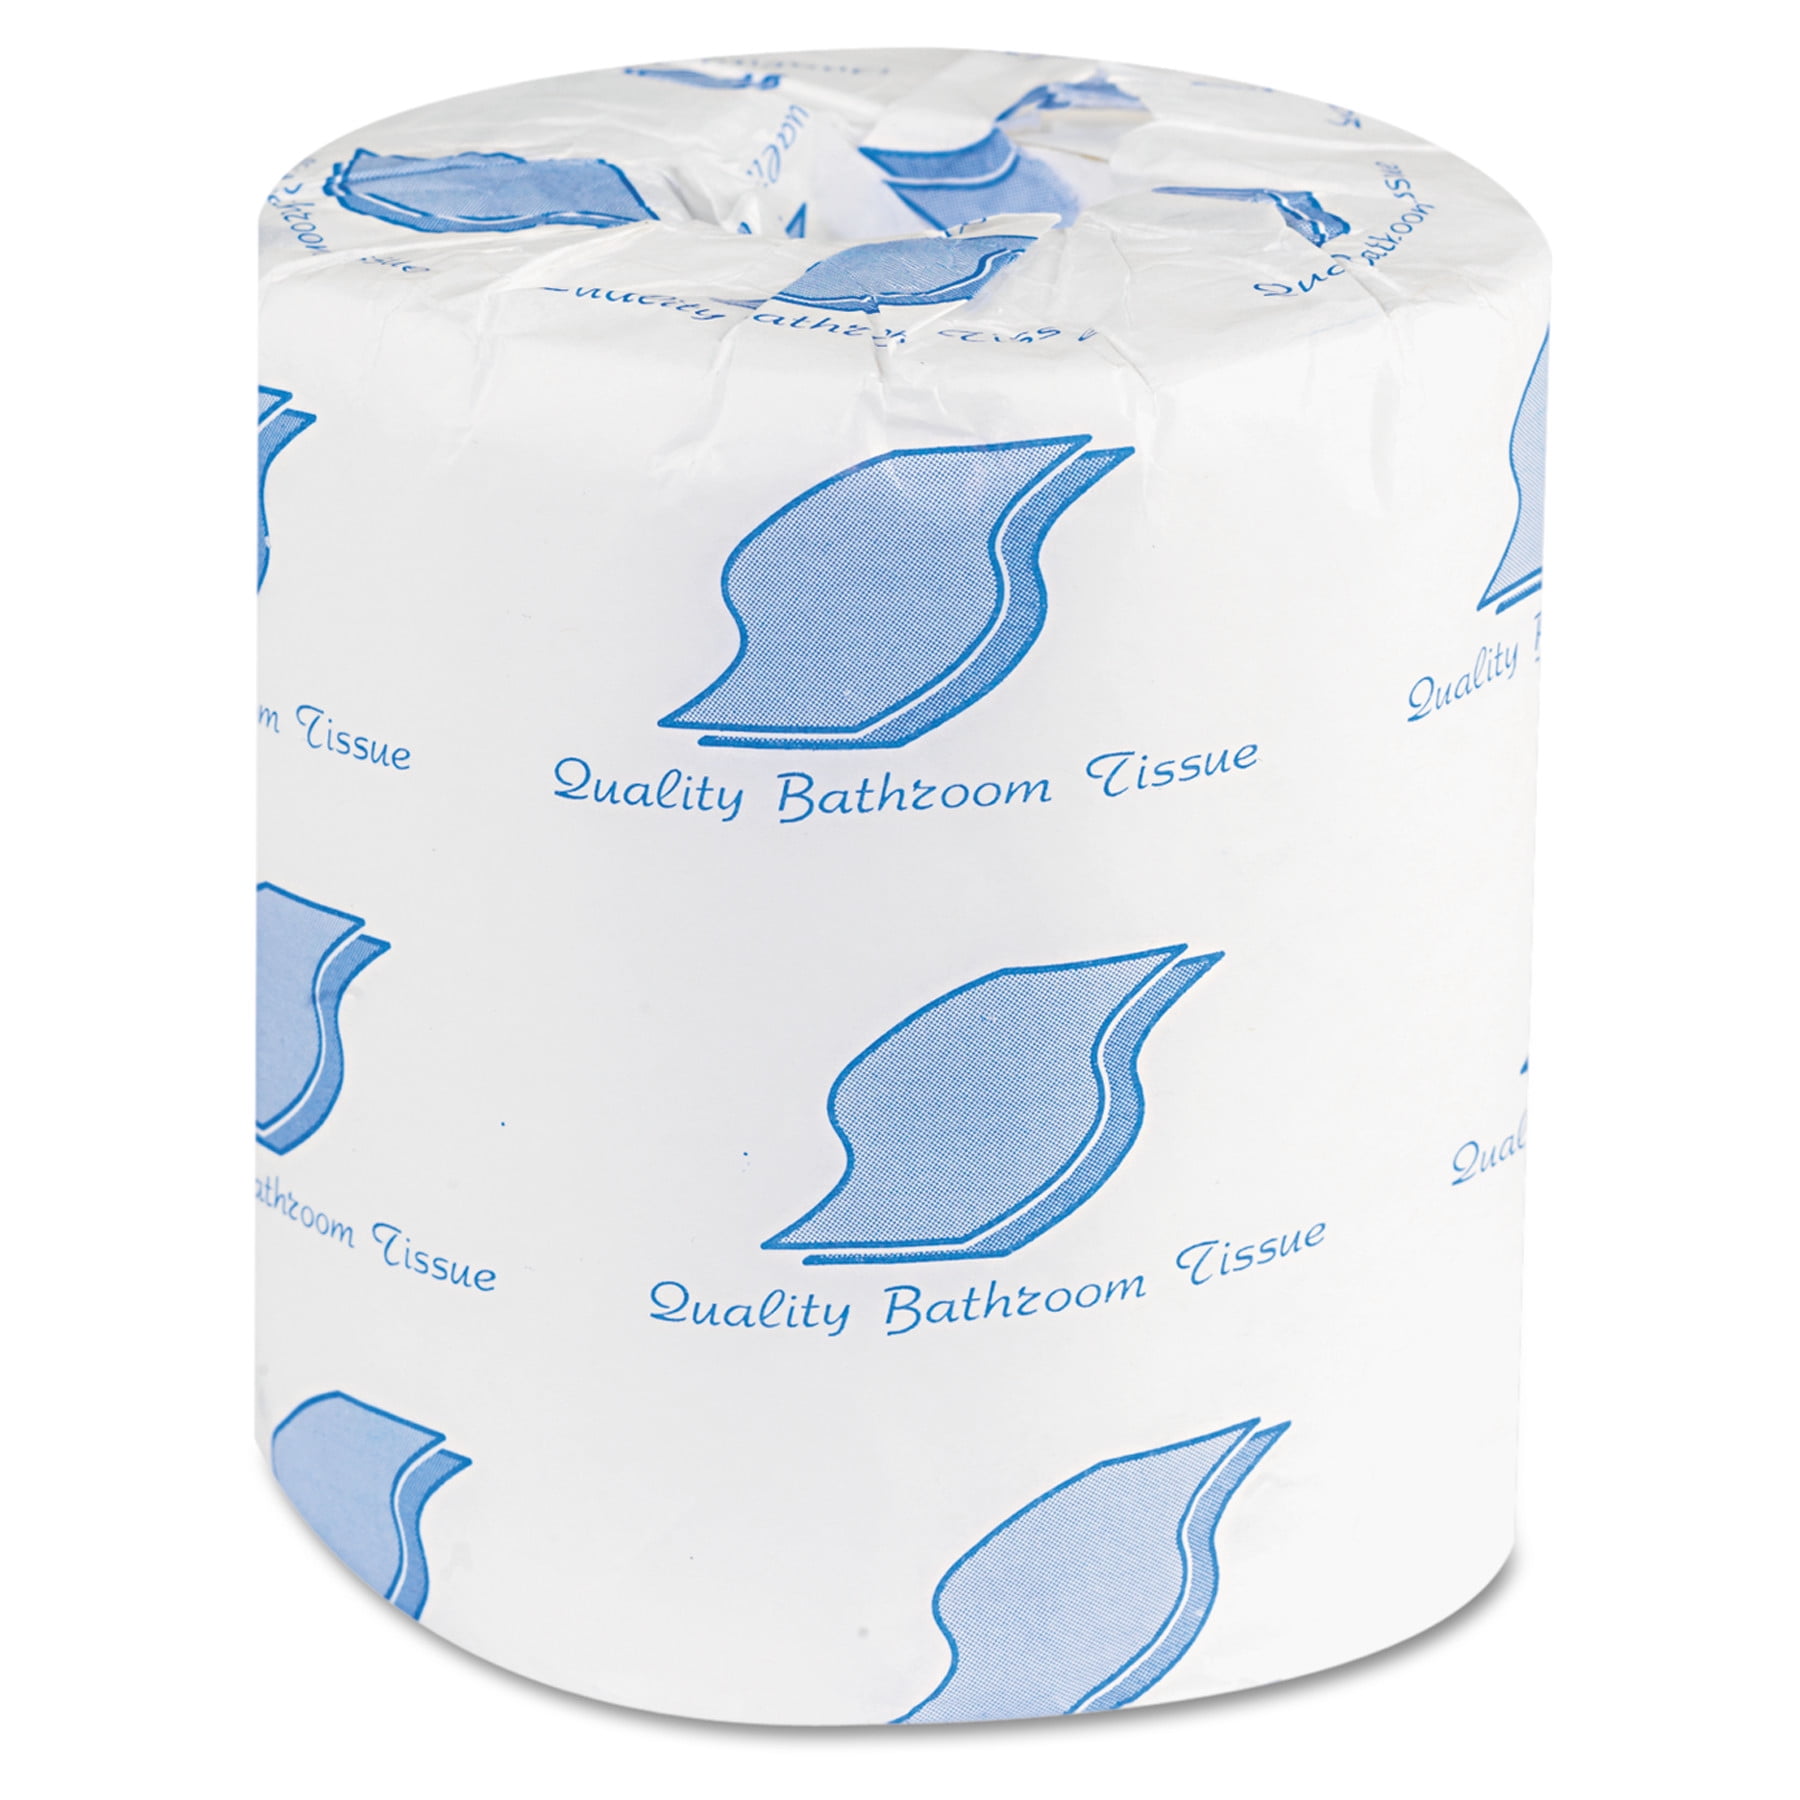 2-Ply 4" x 3" Sheet Individually Wrapped Boardwalk Standard Roll Toilet Paper 